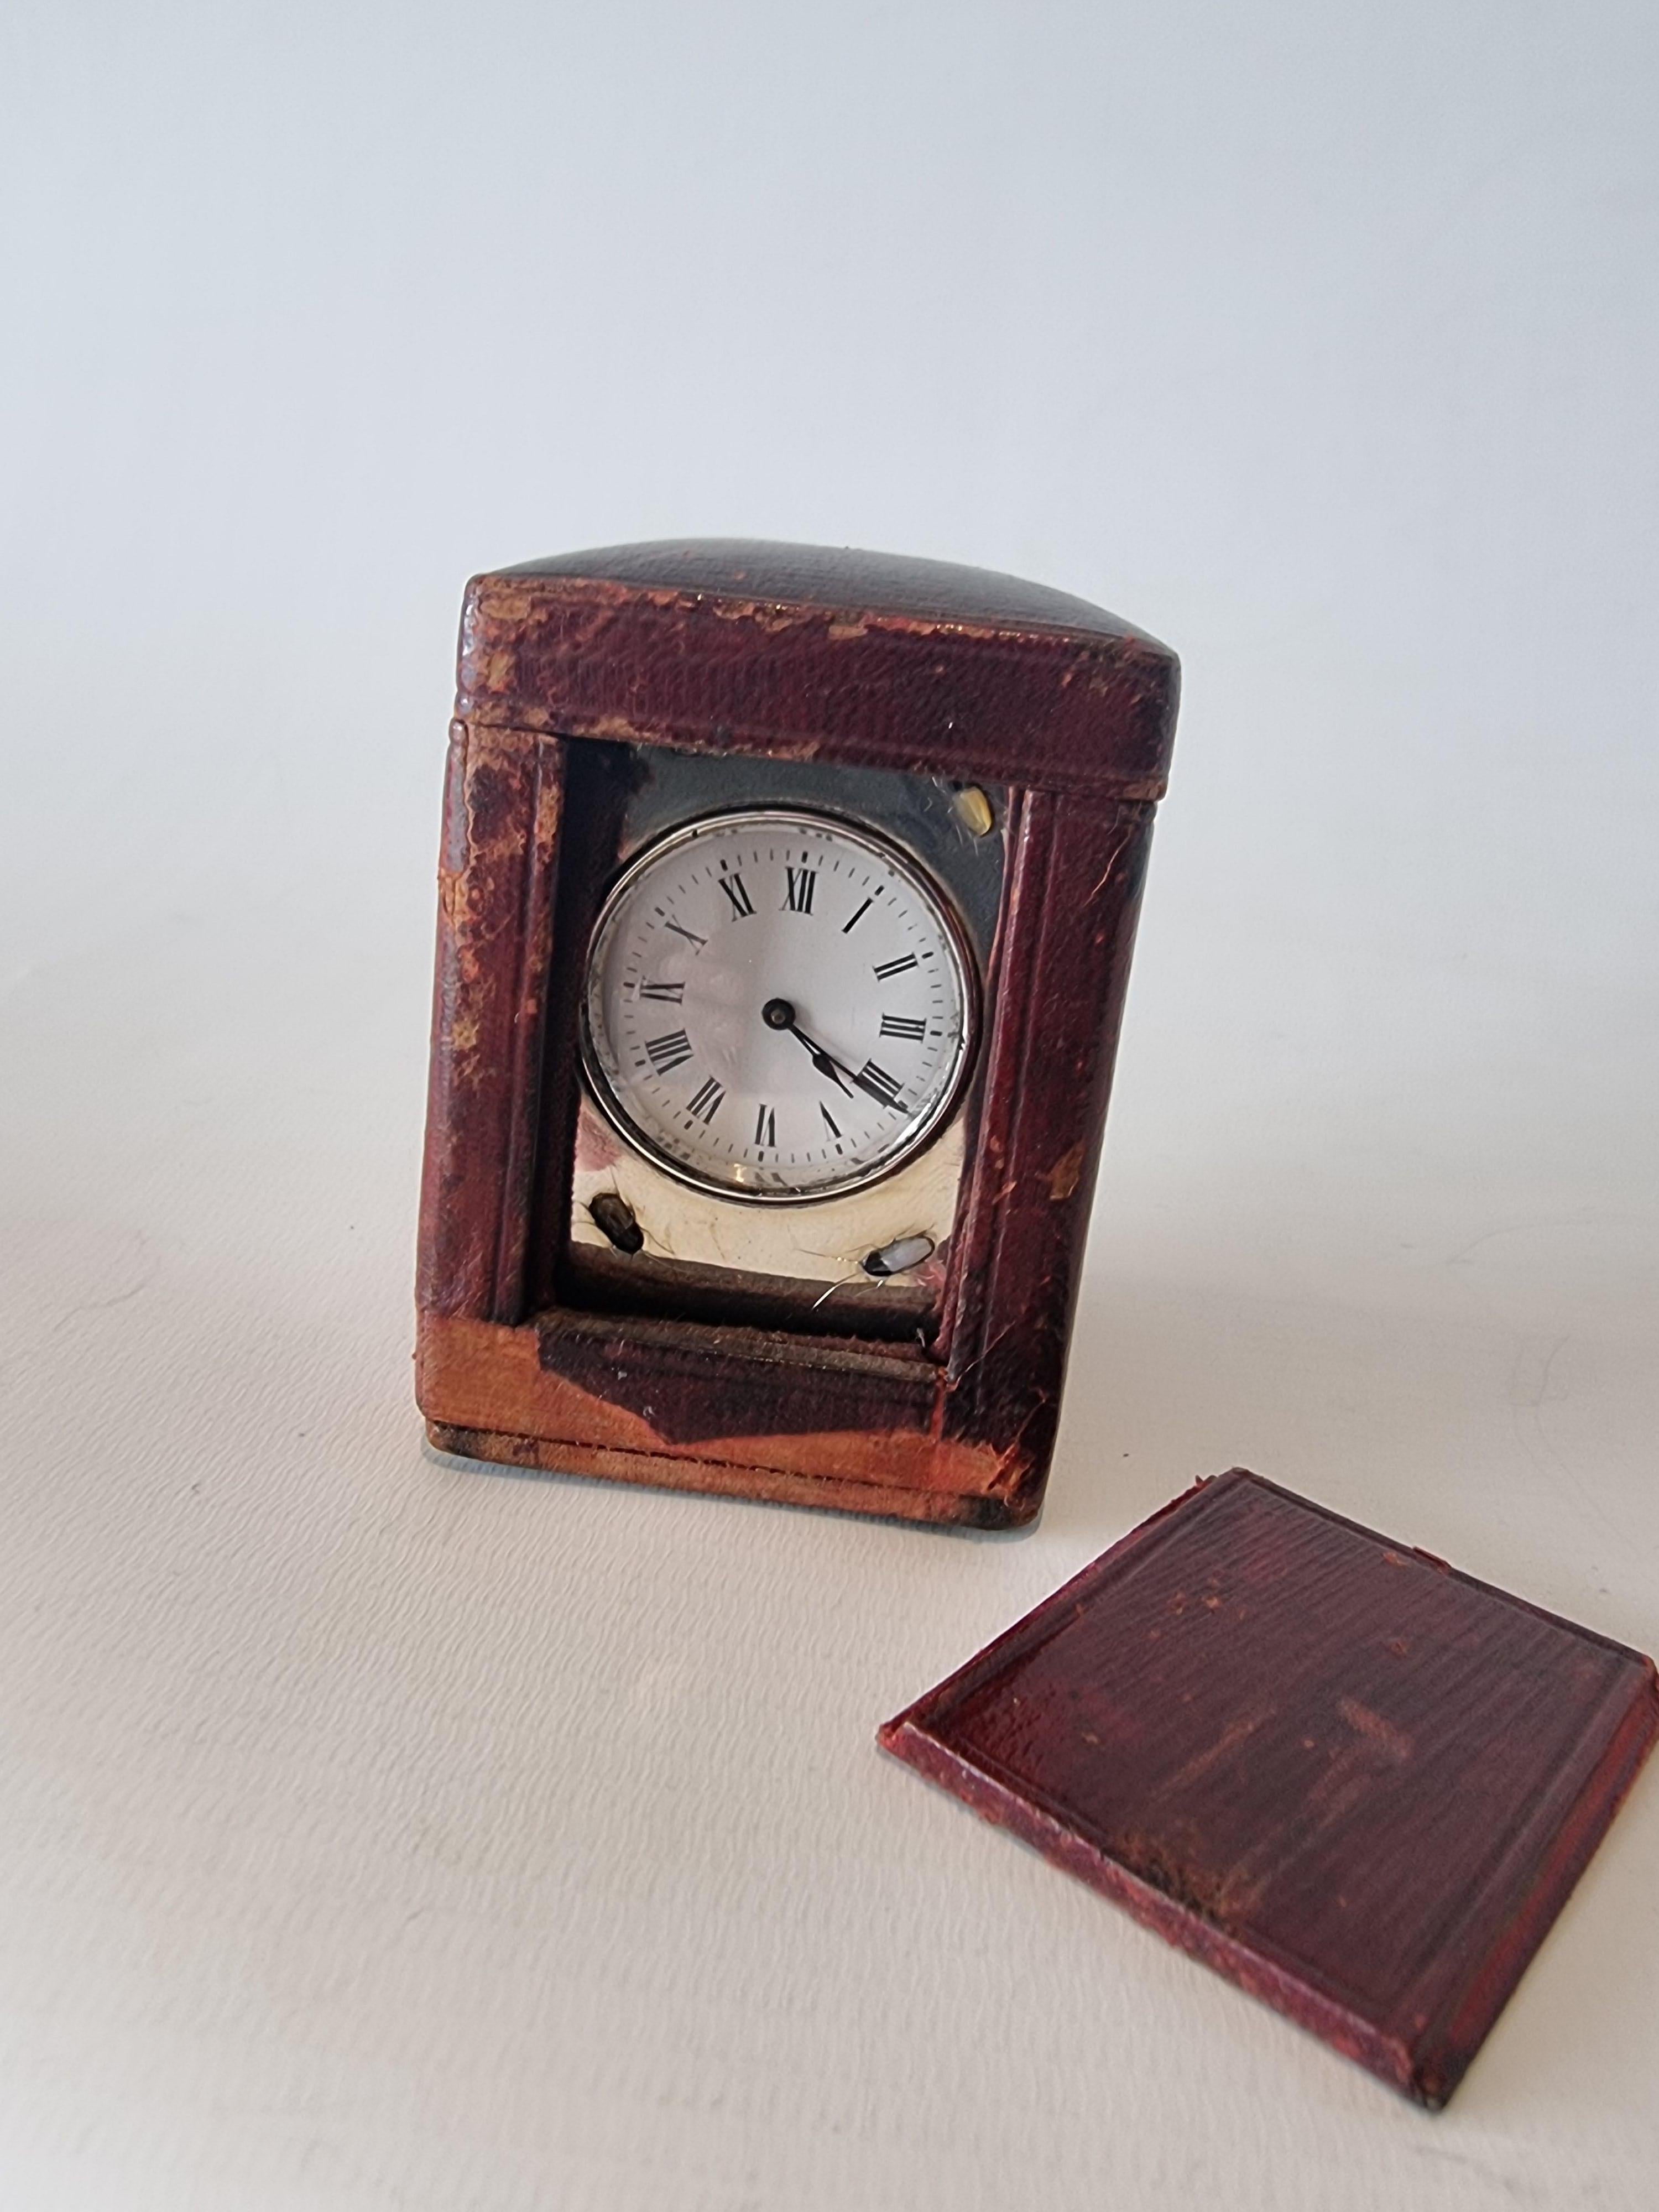 Silver and Shibayama miniature carriage clock in original leather carry case. Exceptional Shibayama work on the silver case with carved semi precious stones. White enamel dial with roman numerals. The fine movement is of 8 day duration and regulated